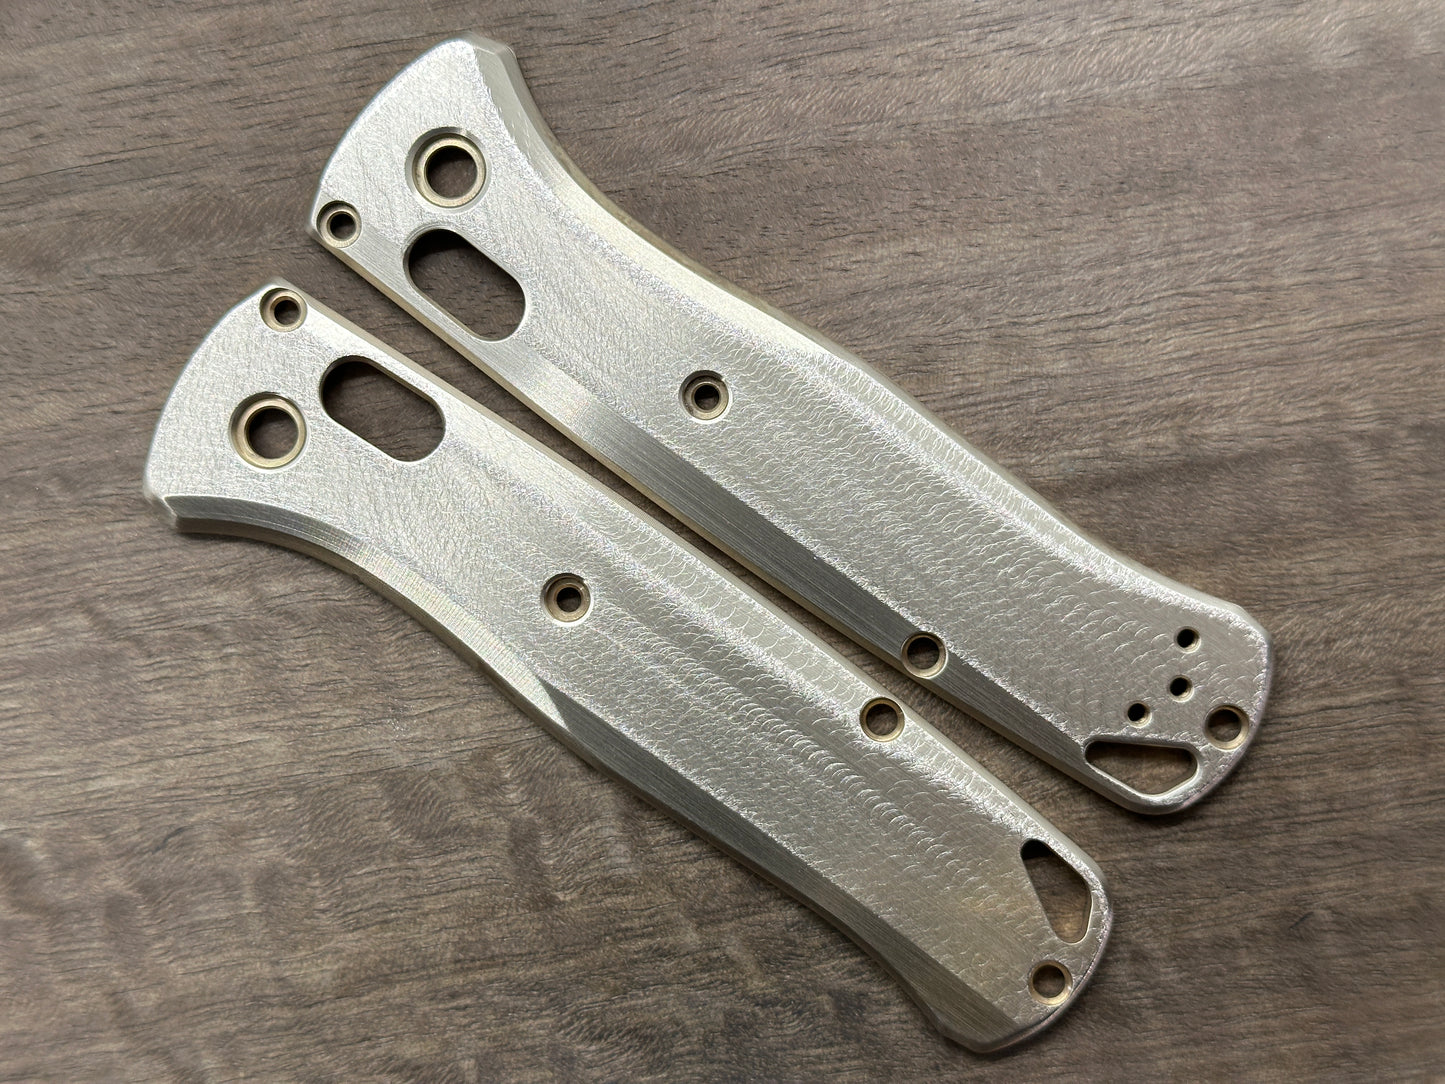 Proprietary Deep Brushed Brass Scales for Benchmade Bugout 535